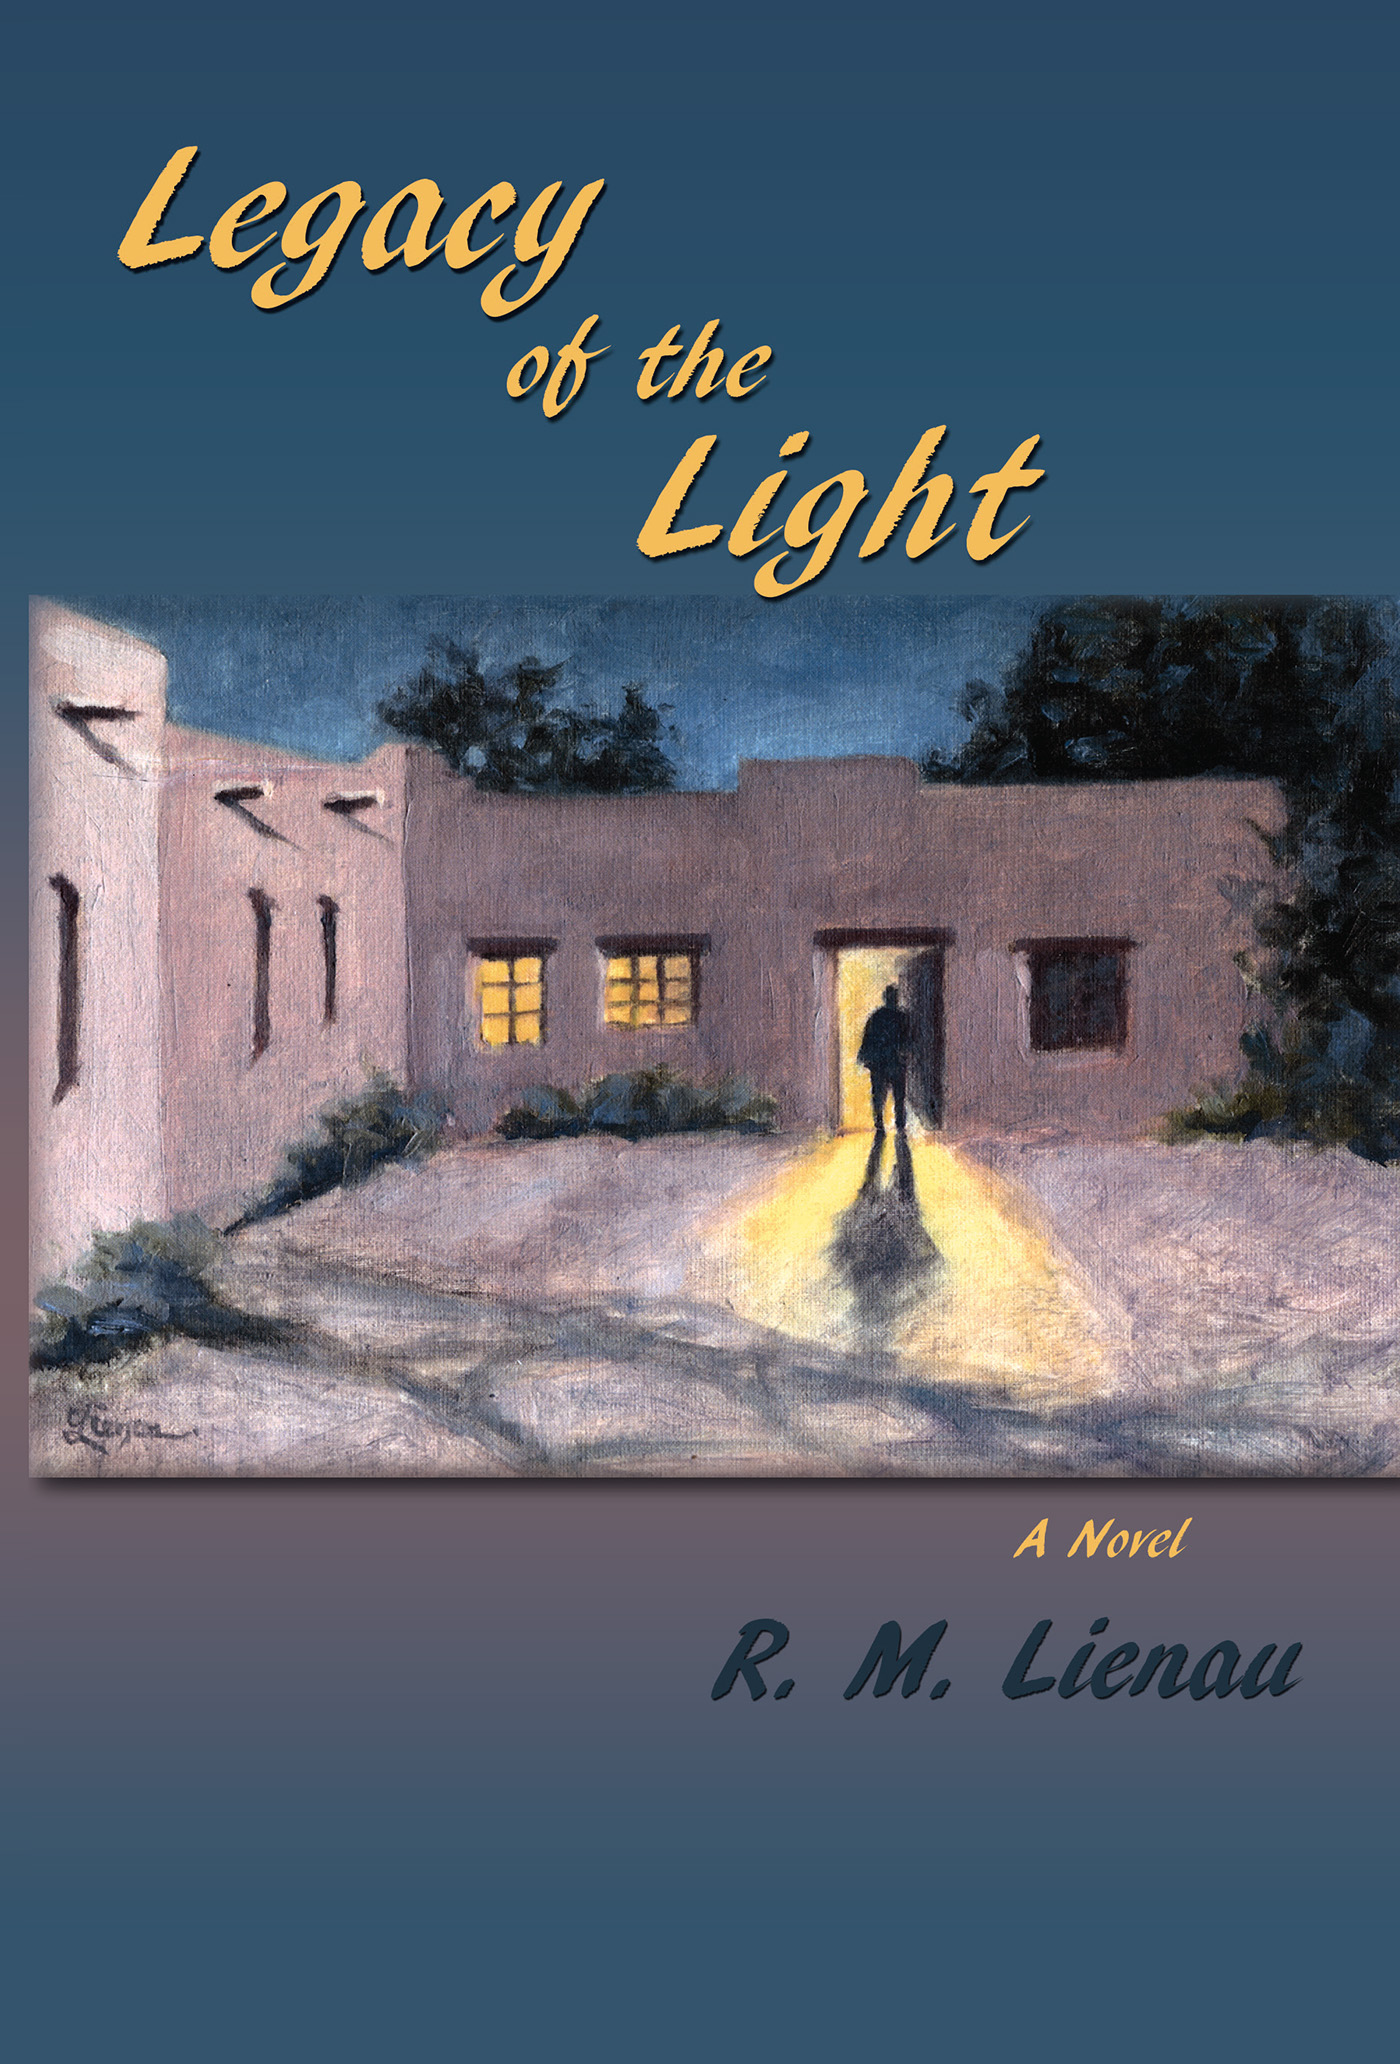 Cover Image of Legacy of the Light